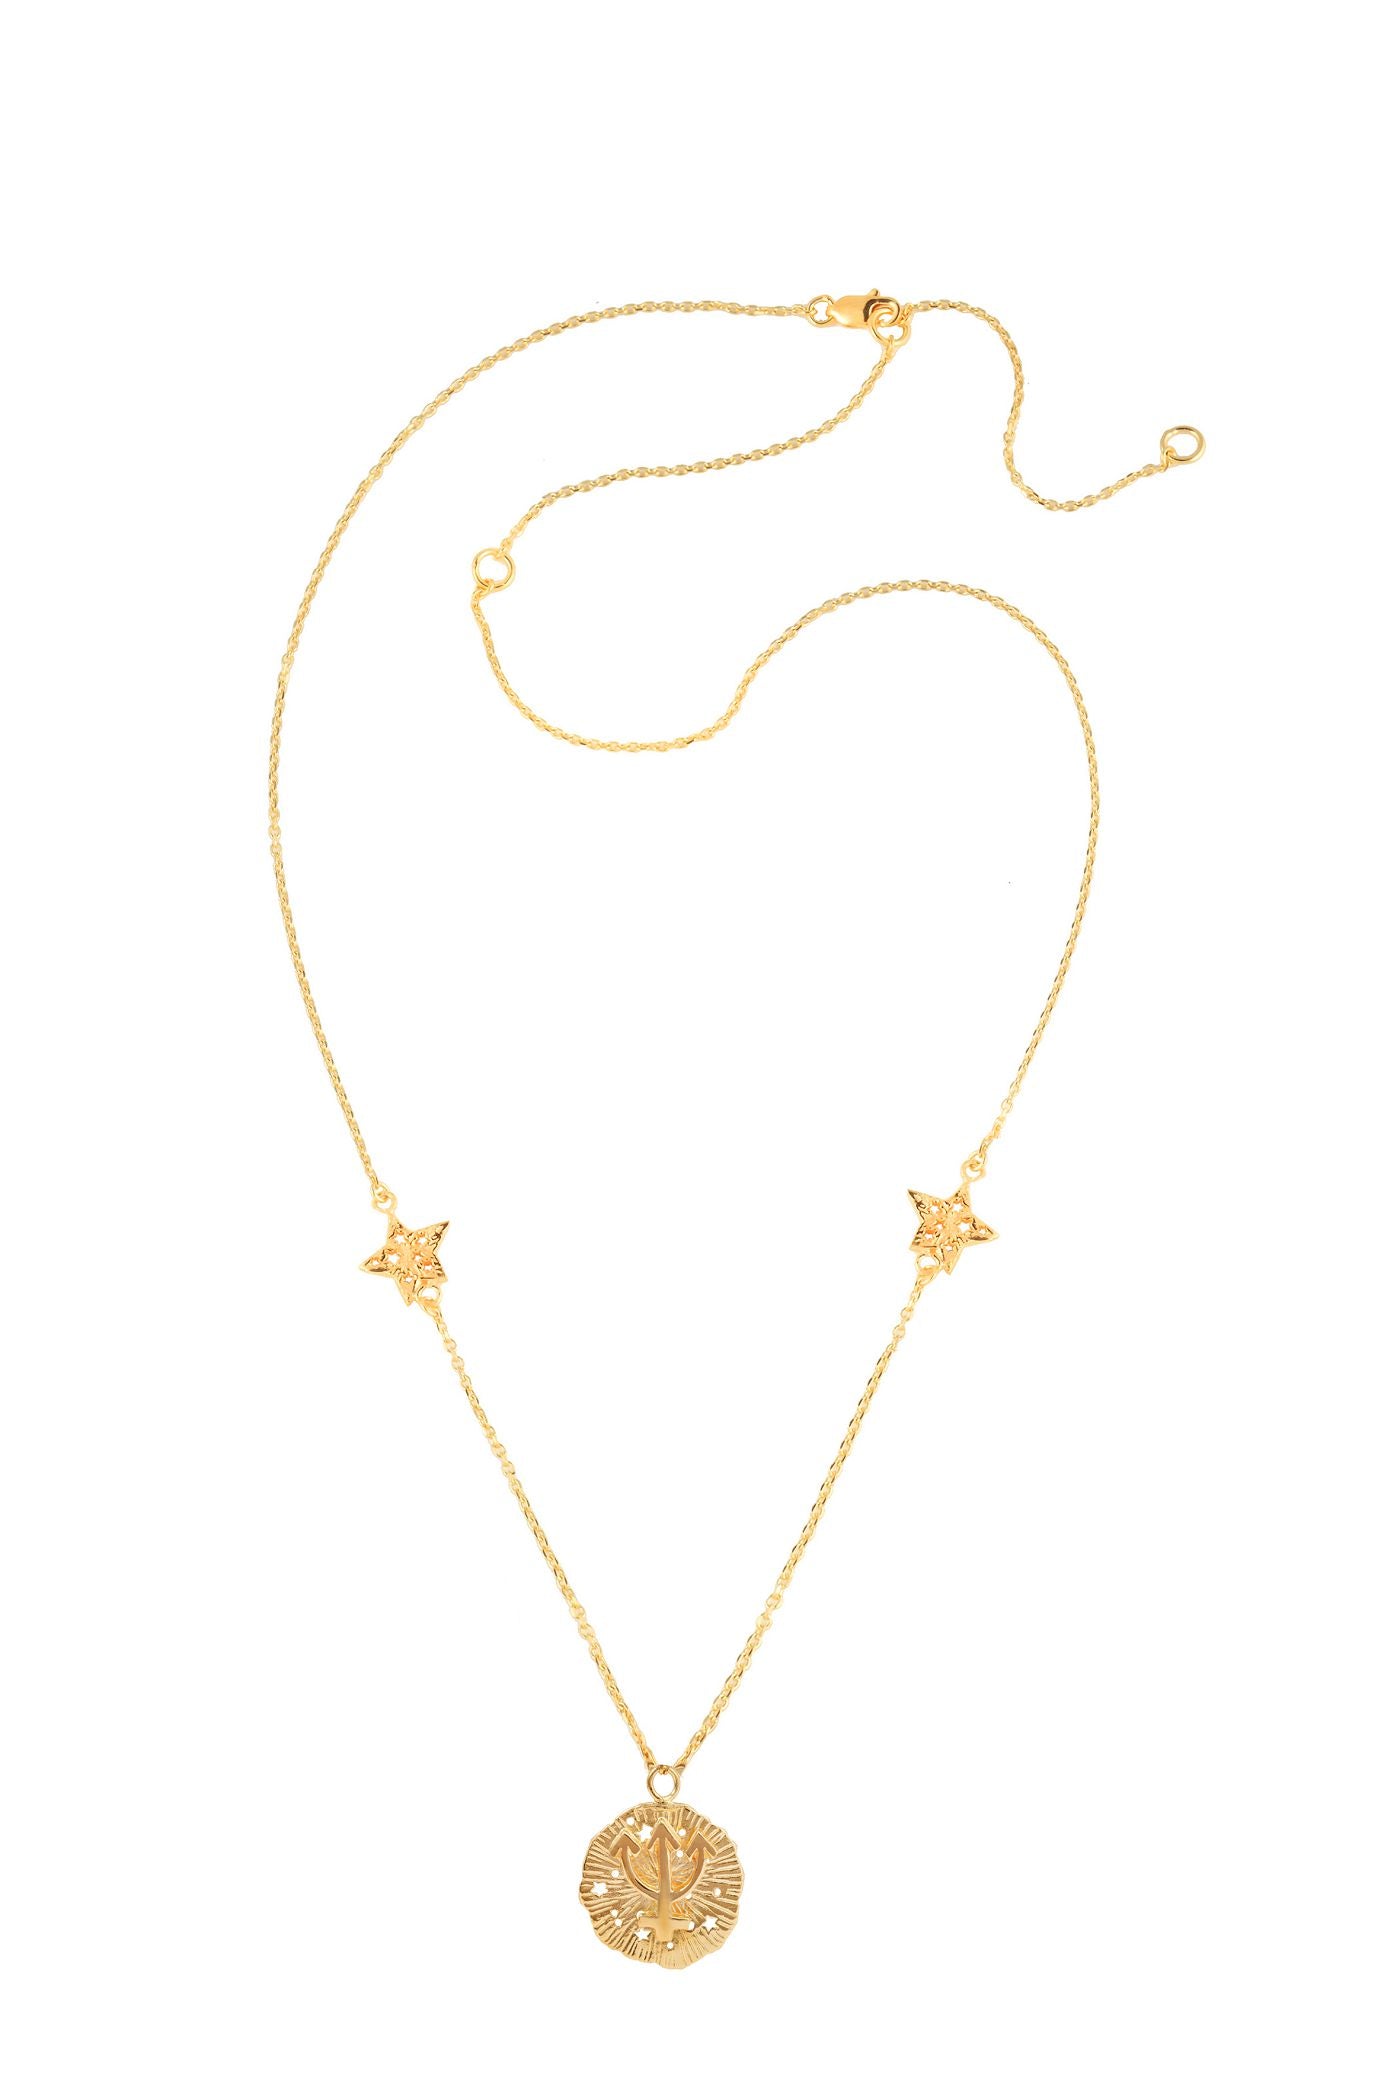 Neptune pendant with stars, 46 cm, gold plated